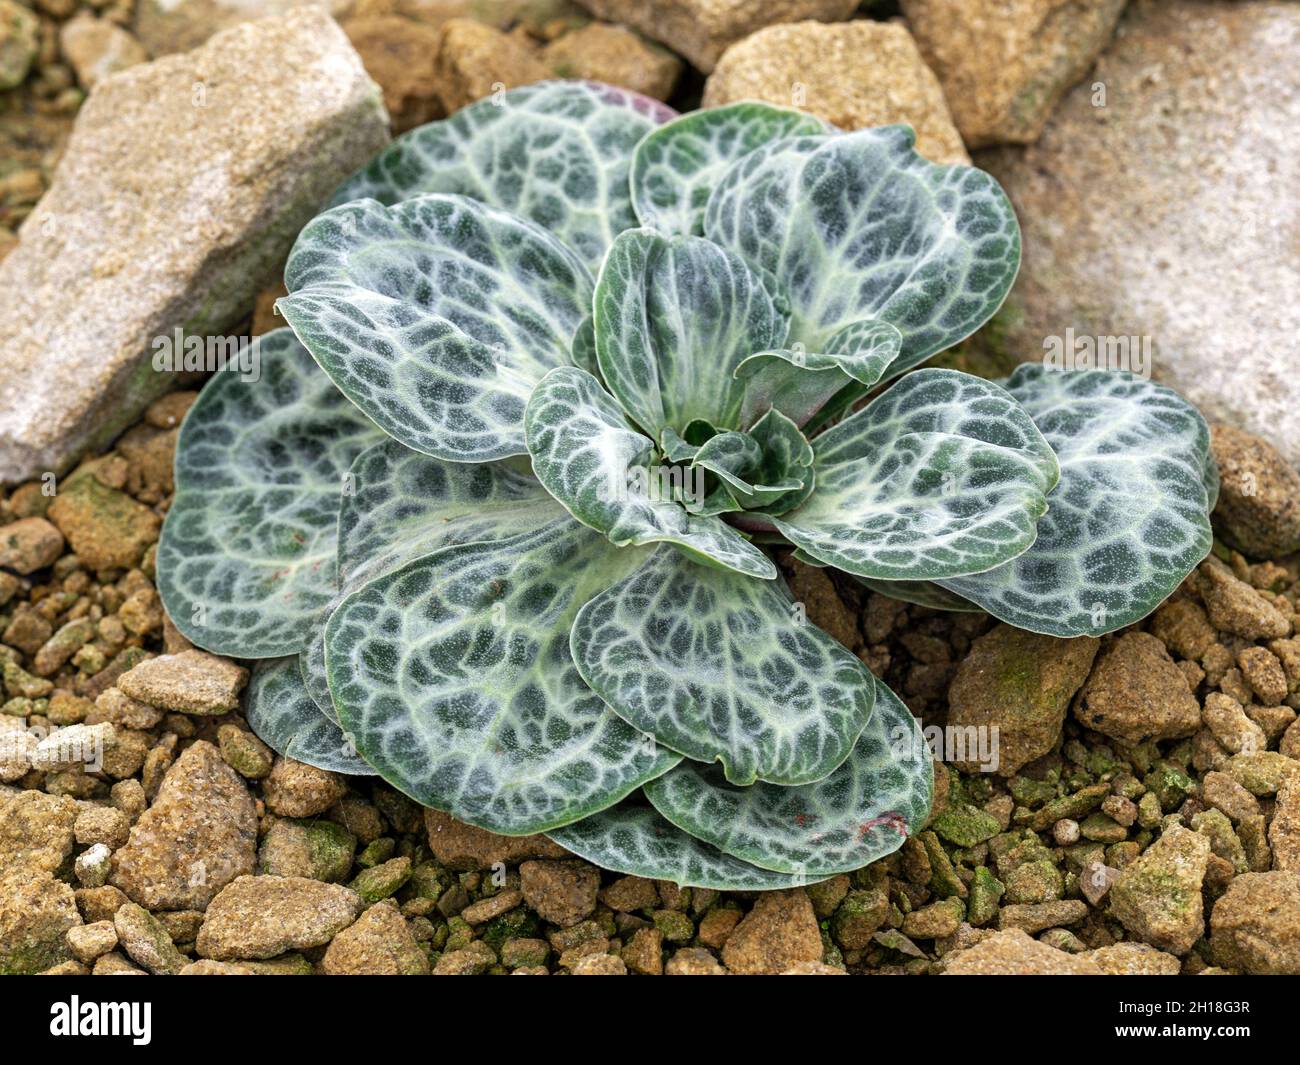 Leaves of a variegated statice plant, Bukiniczia cabulica Stock Photo